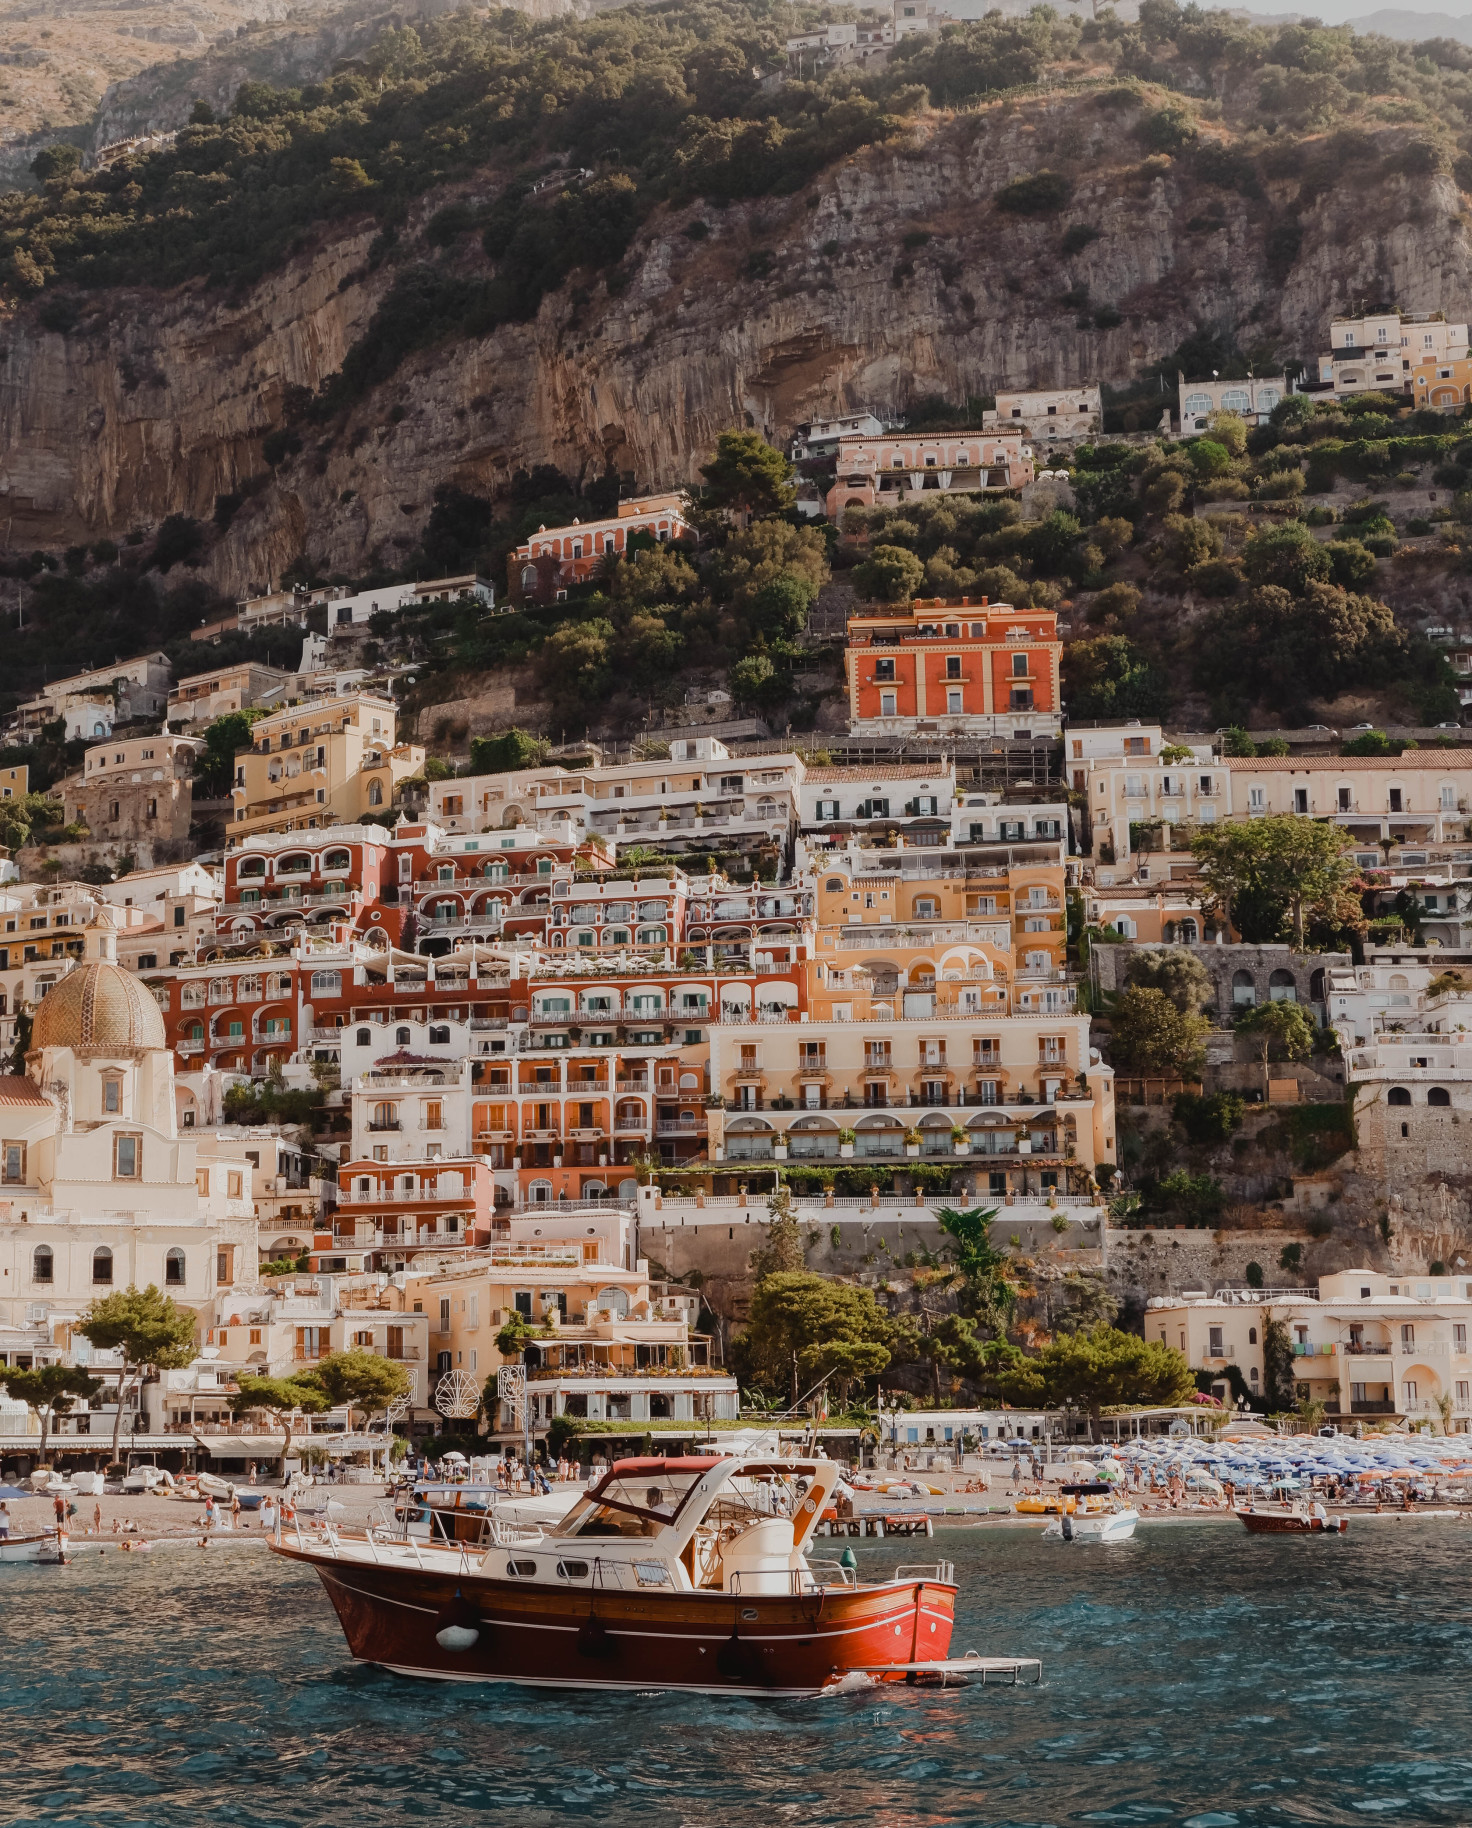 Boat in the water with buildings in the background in Positano, Italy